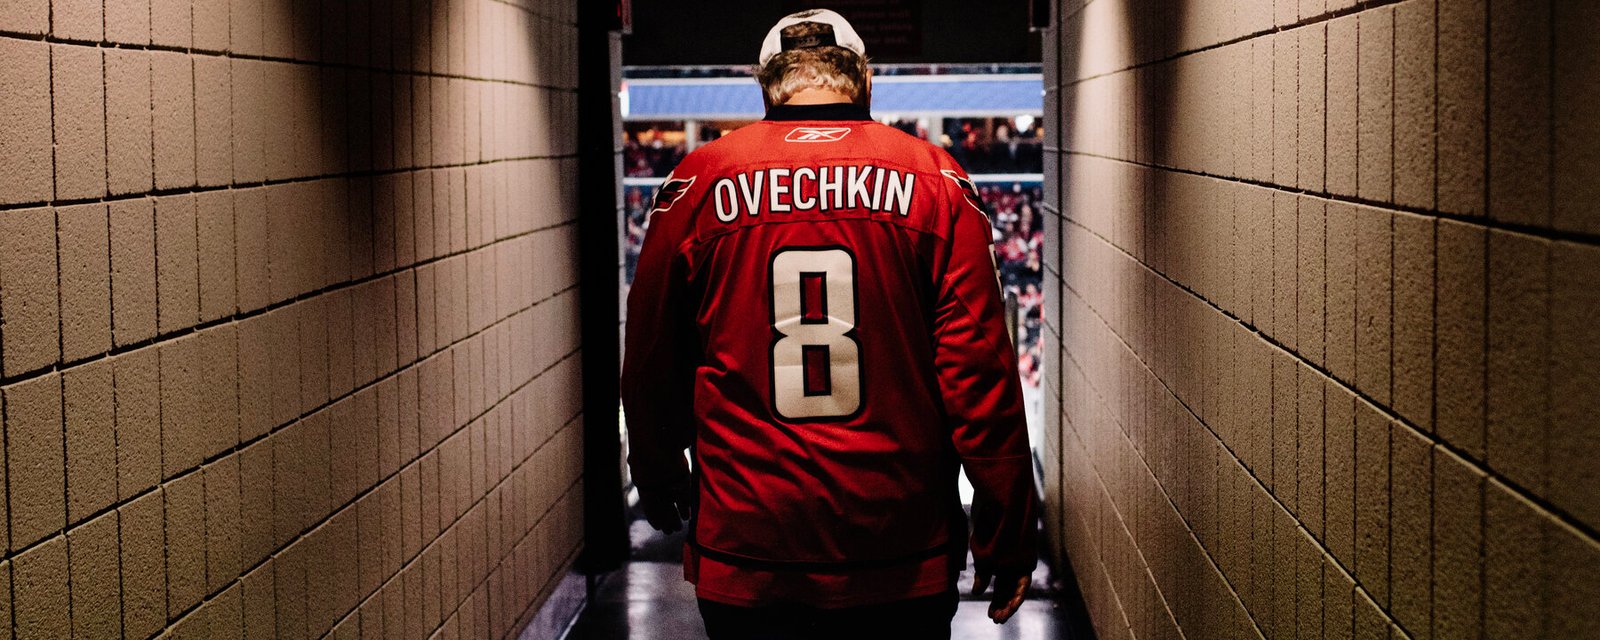 There is a plan in motion for Alex Ovechkin to return to Russia